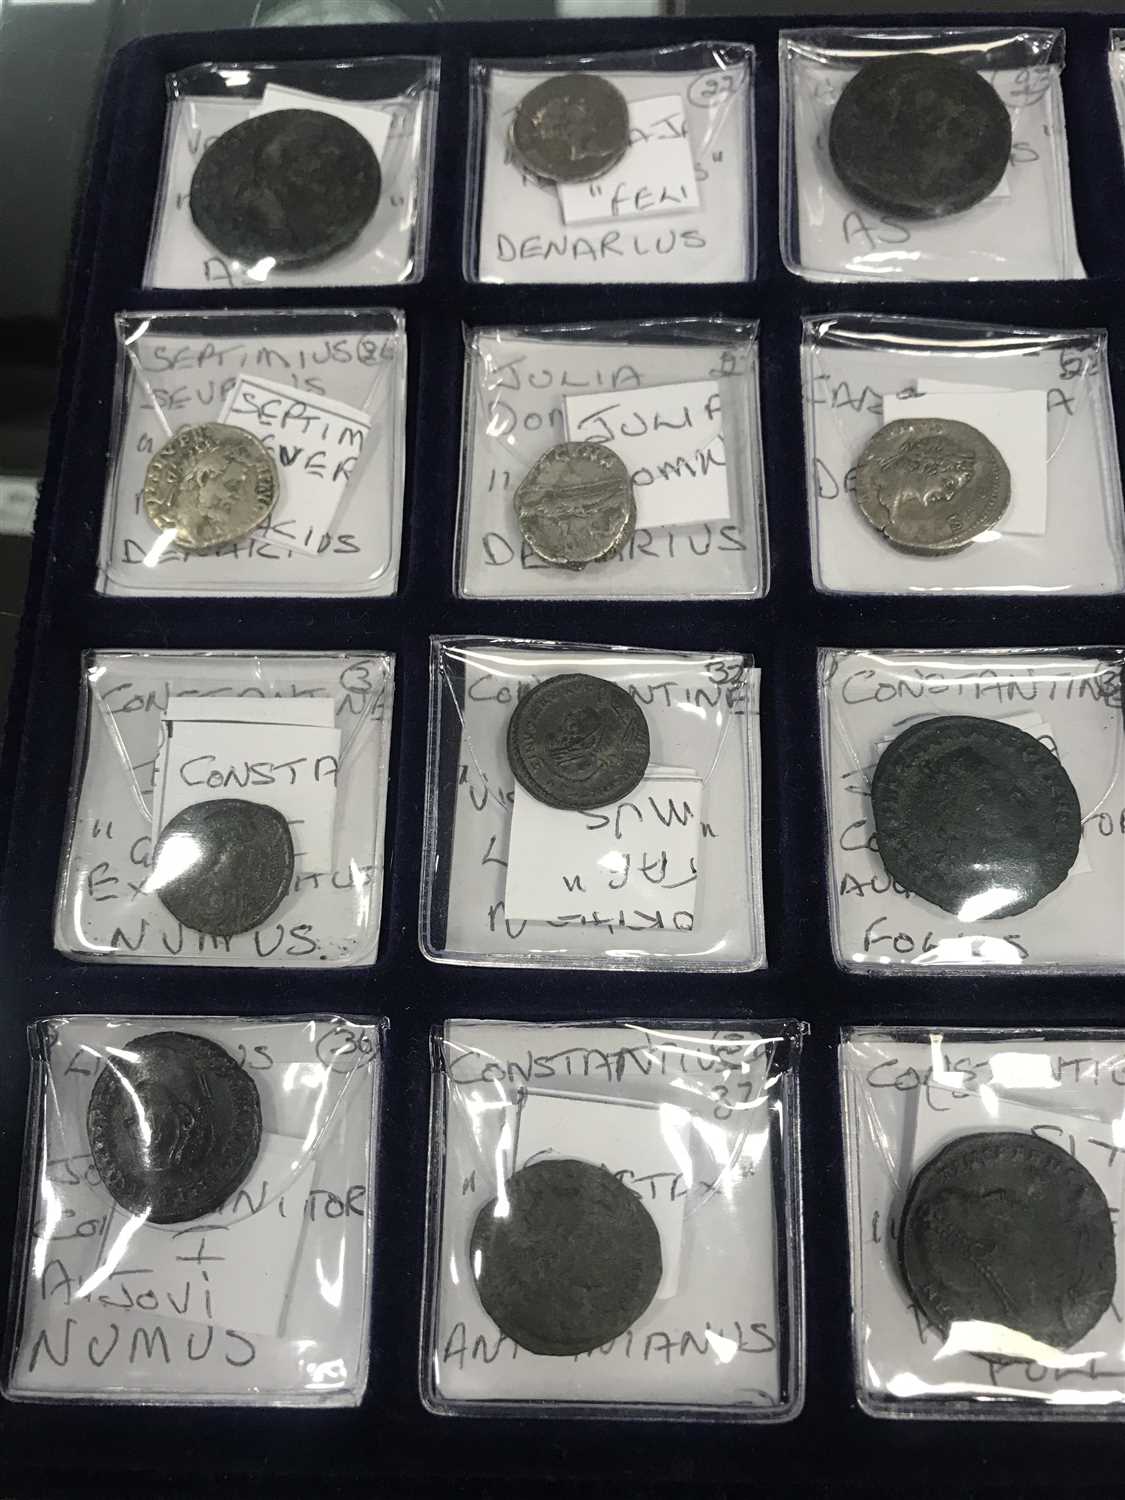 Lot 553 - A LOT OF ROMAN COINS Amendment - some coins have been swapped between this and 554 to correctly reflect the labels underneathSILVER AND COPPER ROMAN COINS